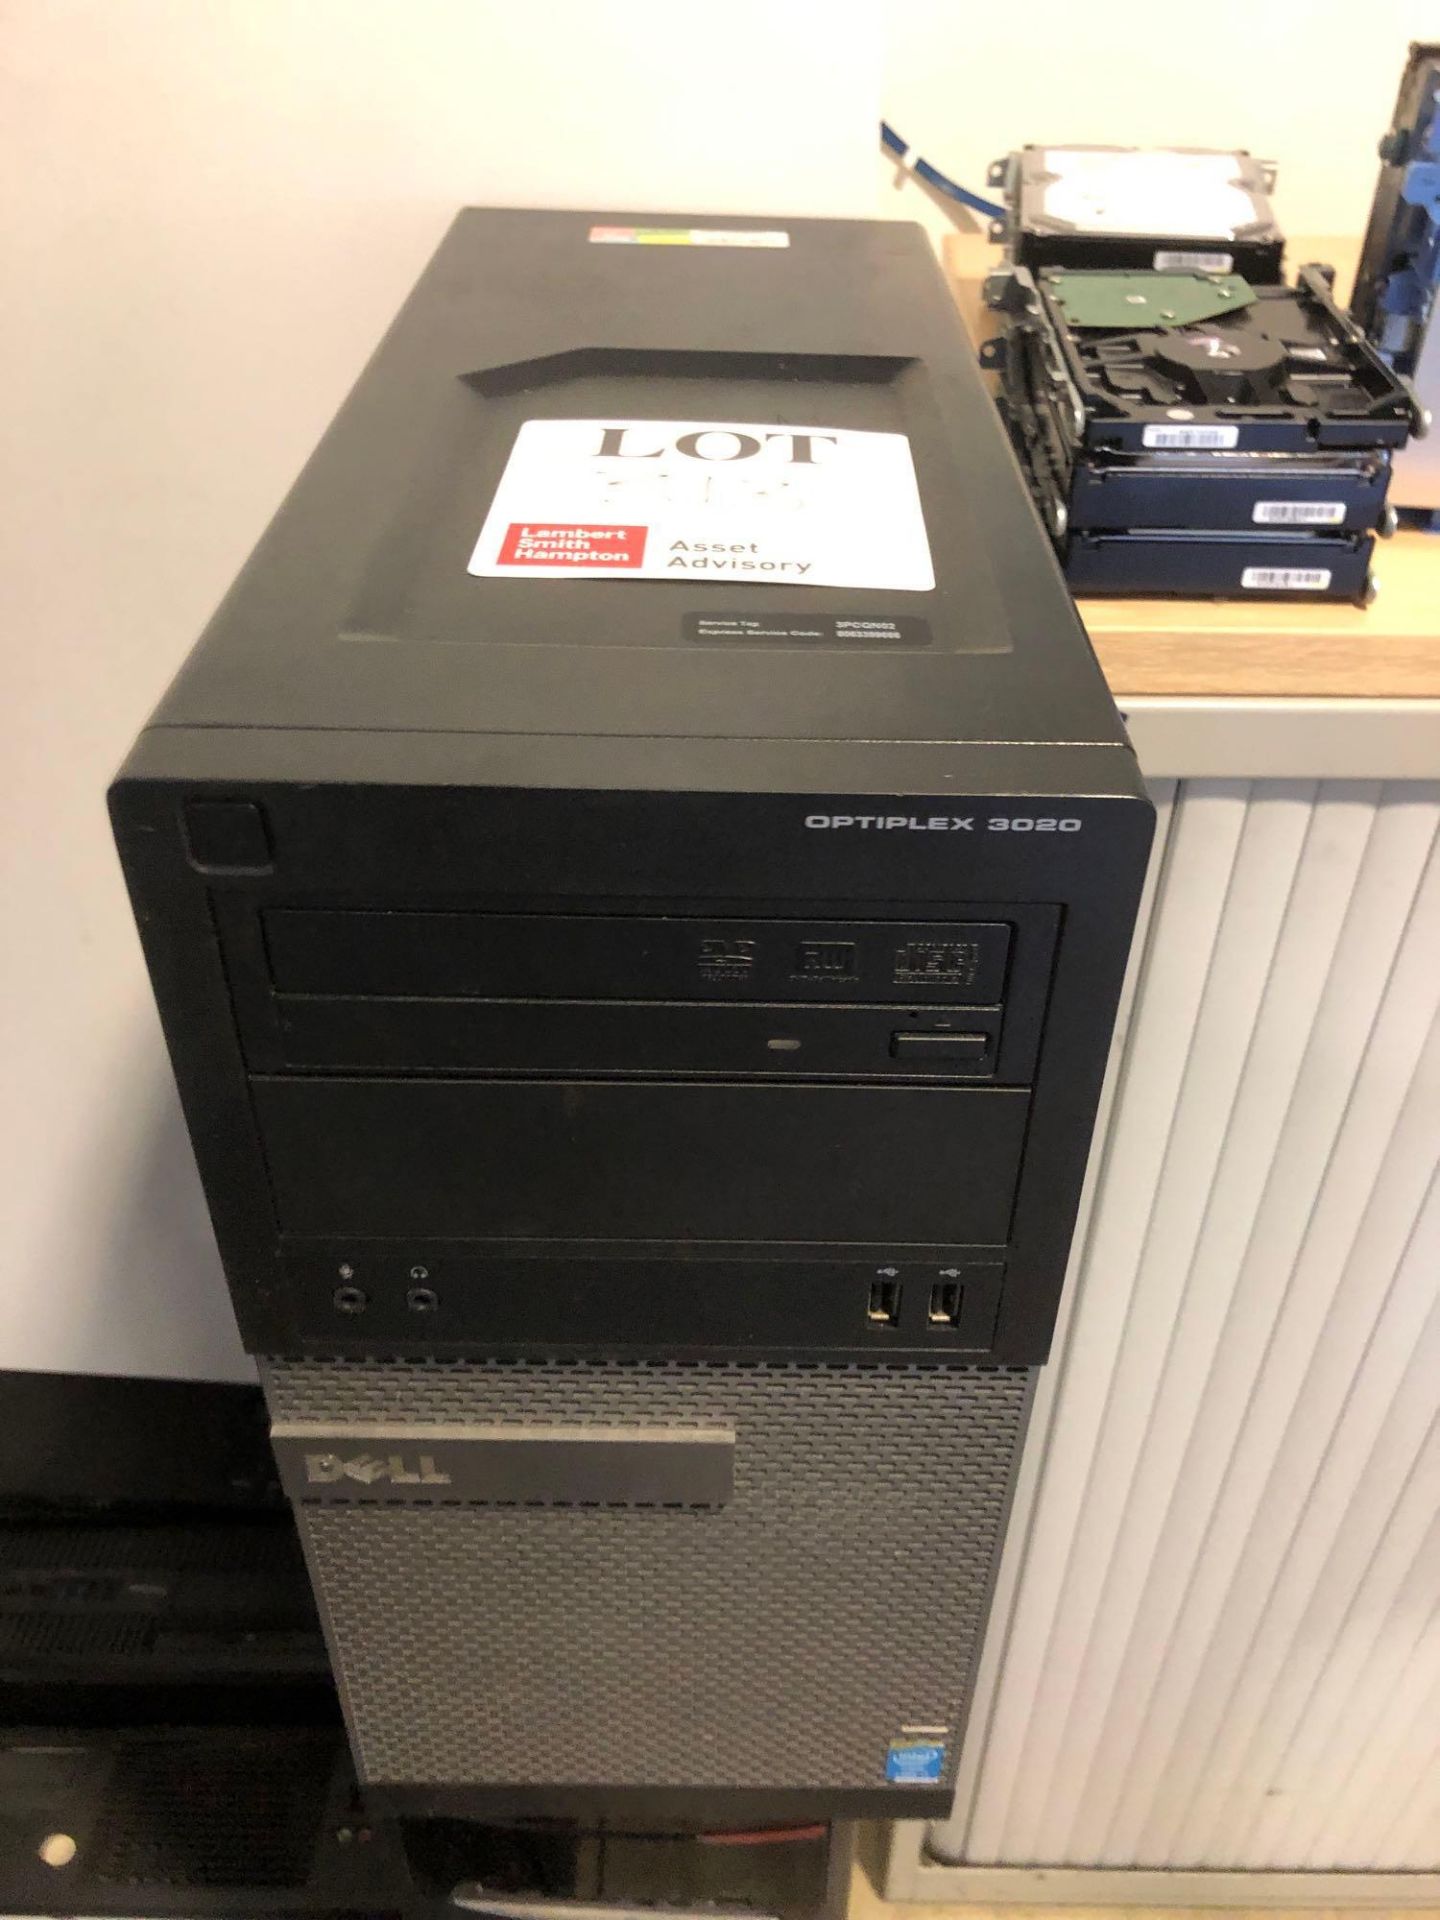 Dell Optiplex 3020 Core i3 PC, Asus Core i3 - 3020 PC and a Zoostorm PC (Note all Hard Drives